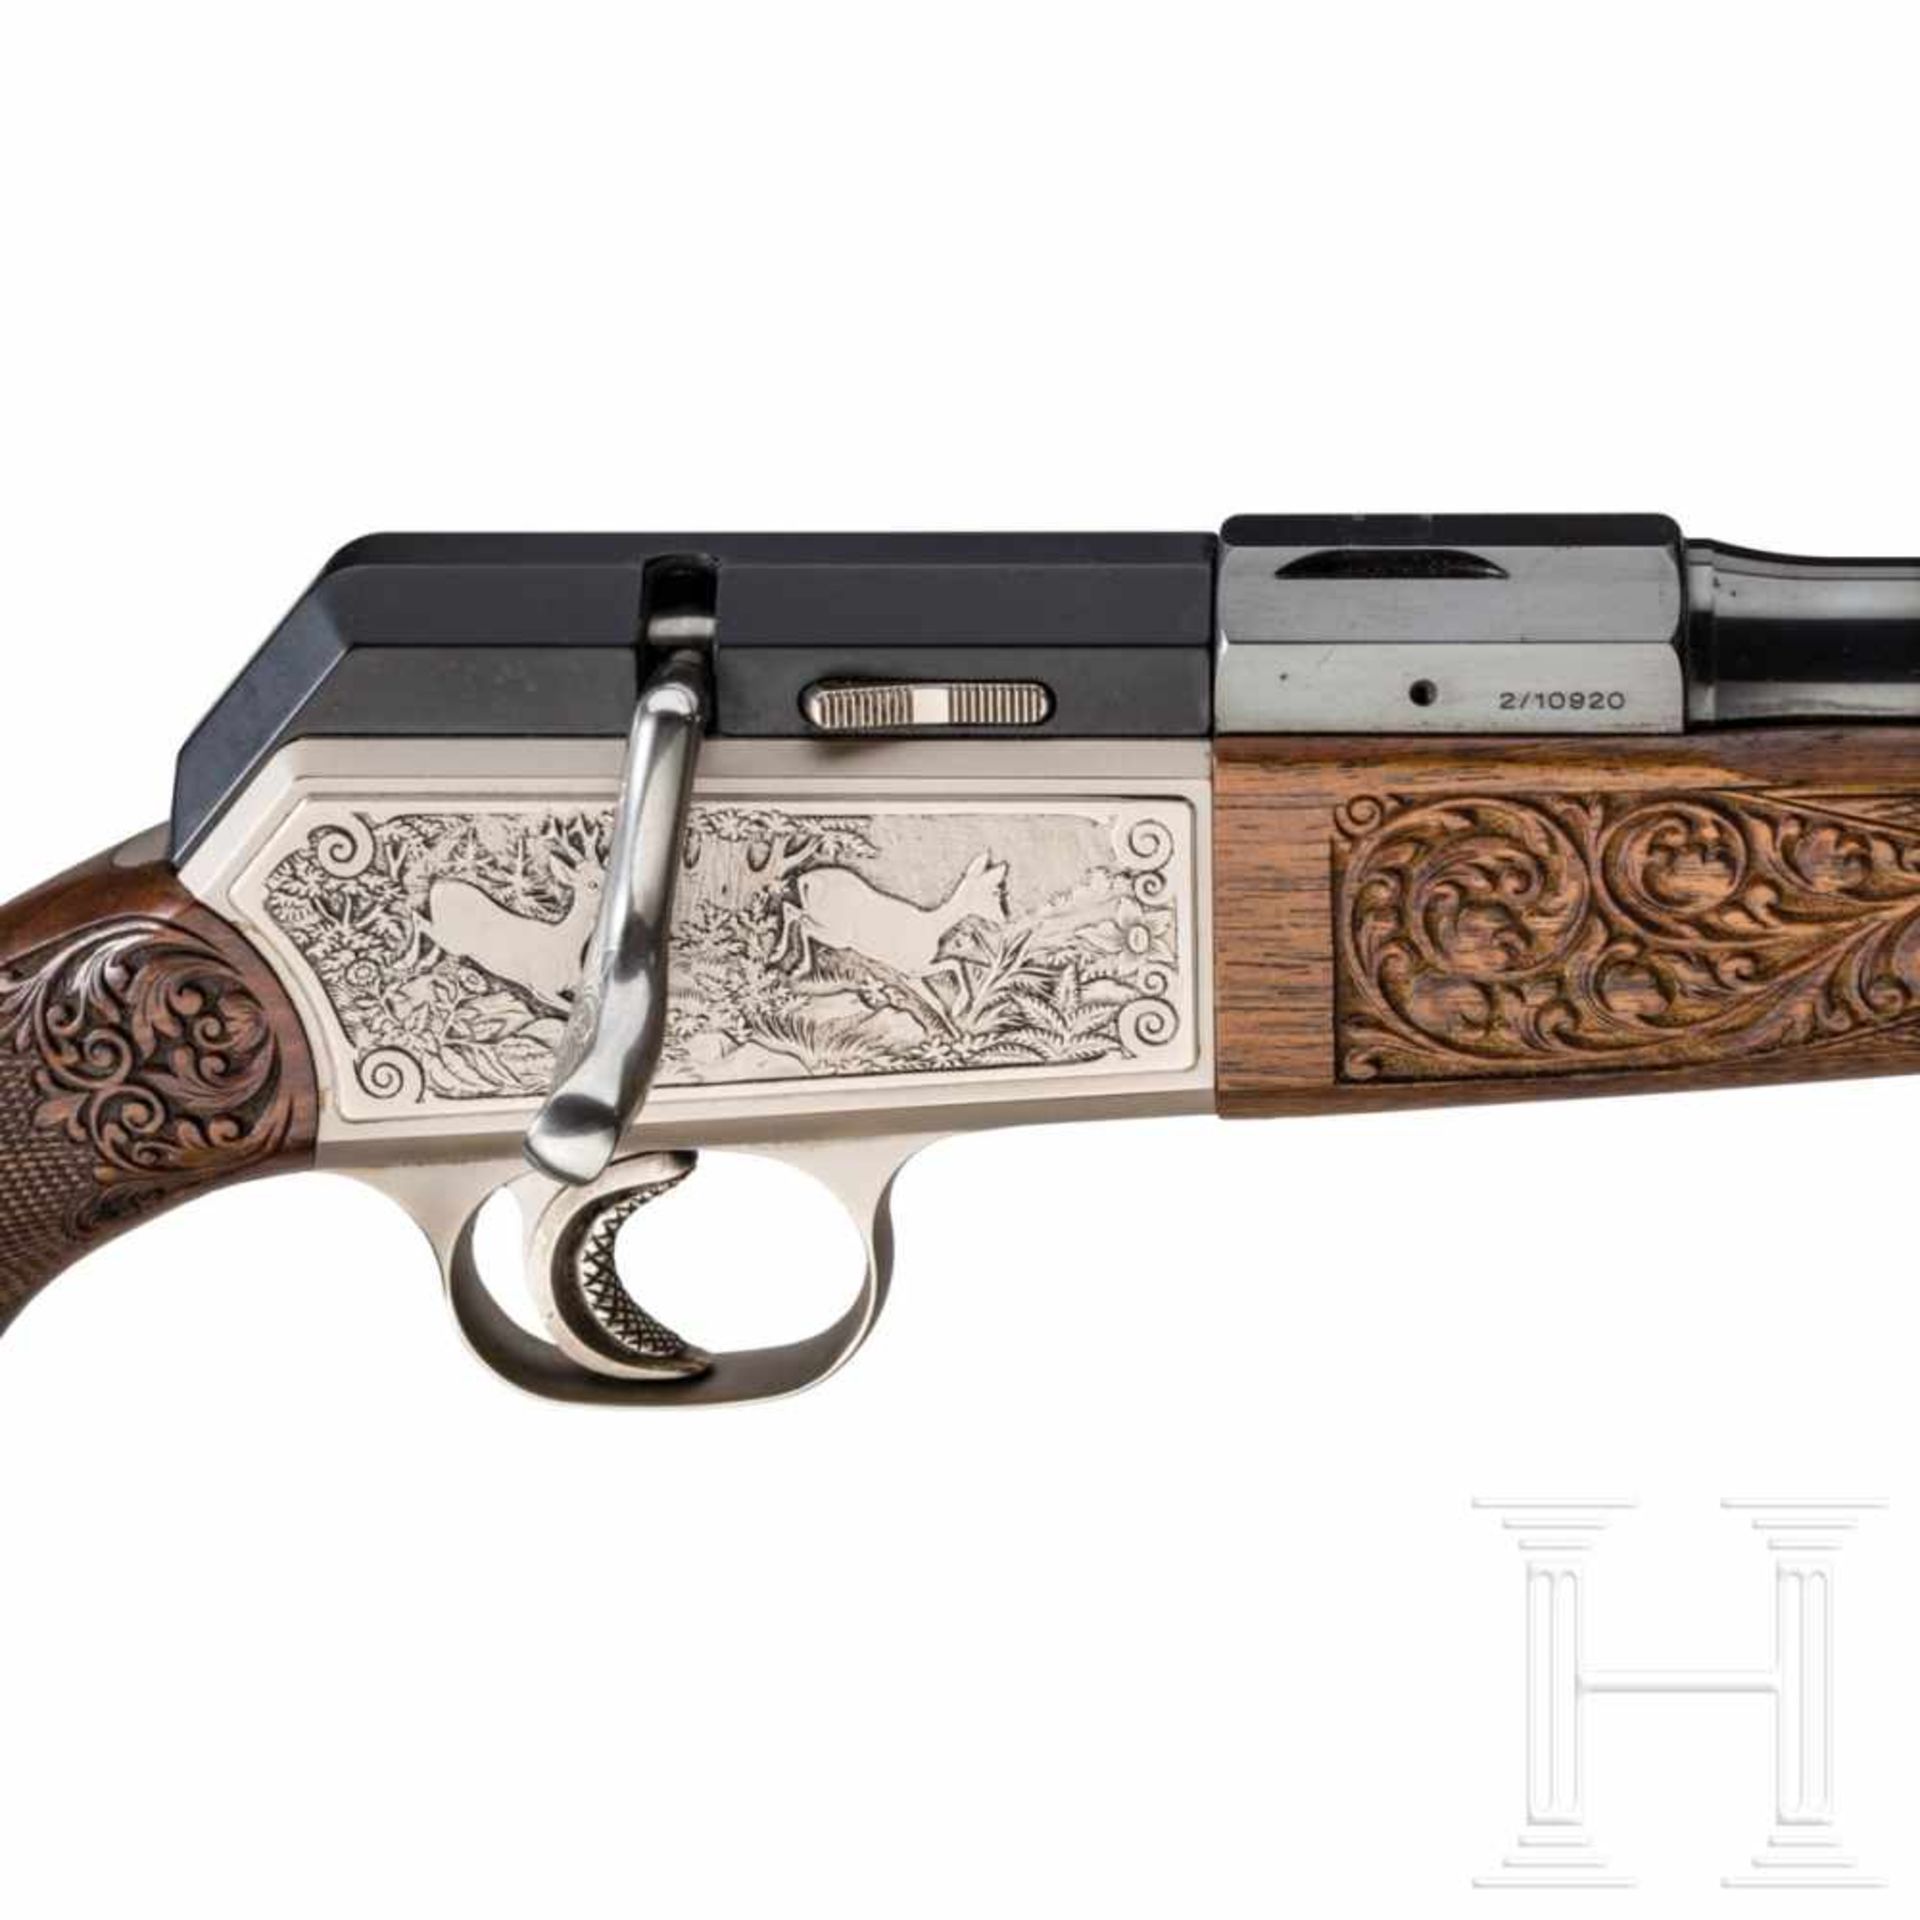 A cased Blaser M SR 850/88 Luxus repeating rifle with interchangeable barrel and Zeiss scopeKal. . - Bild 3 aus 5